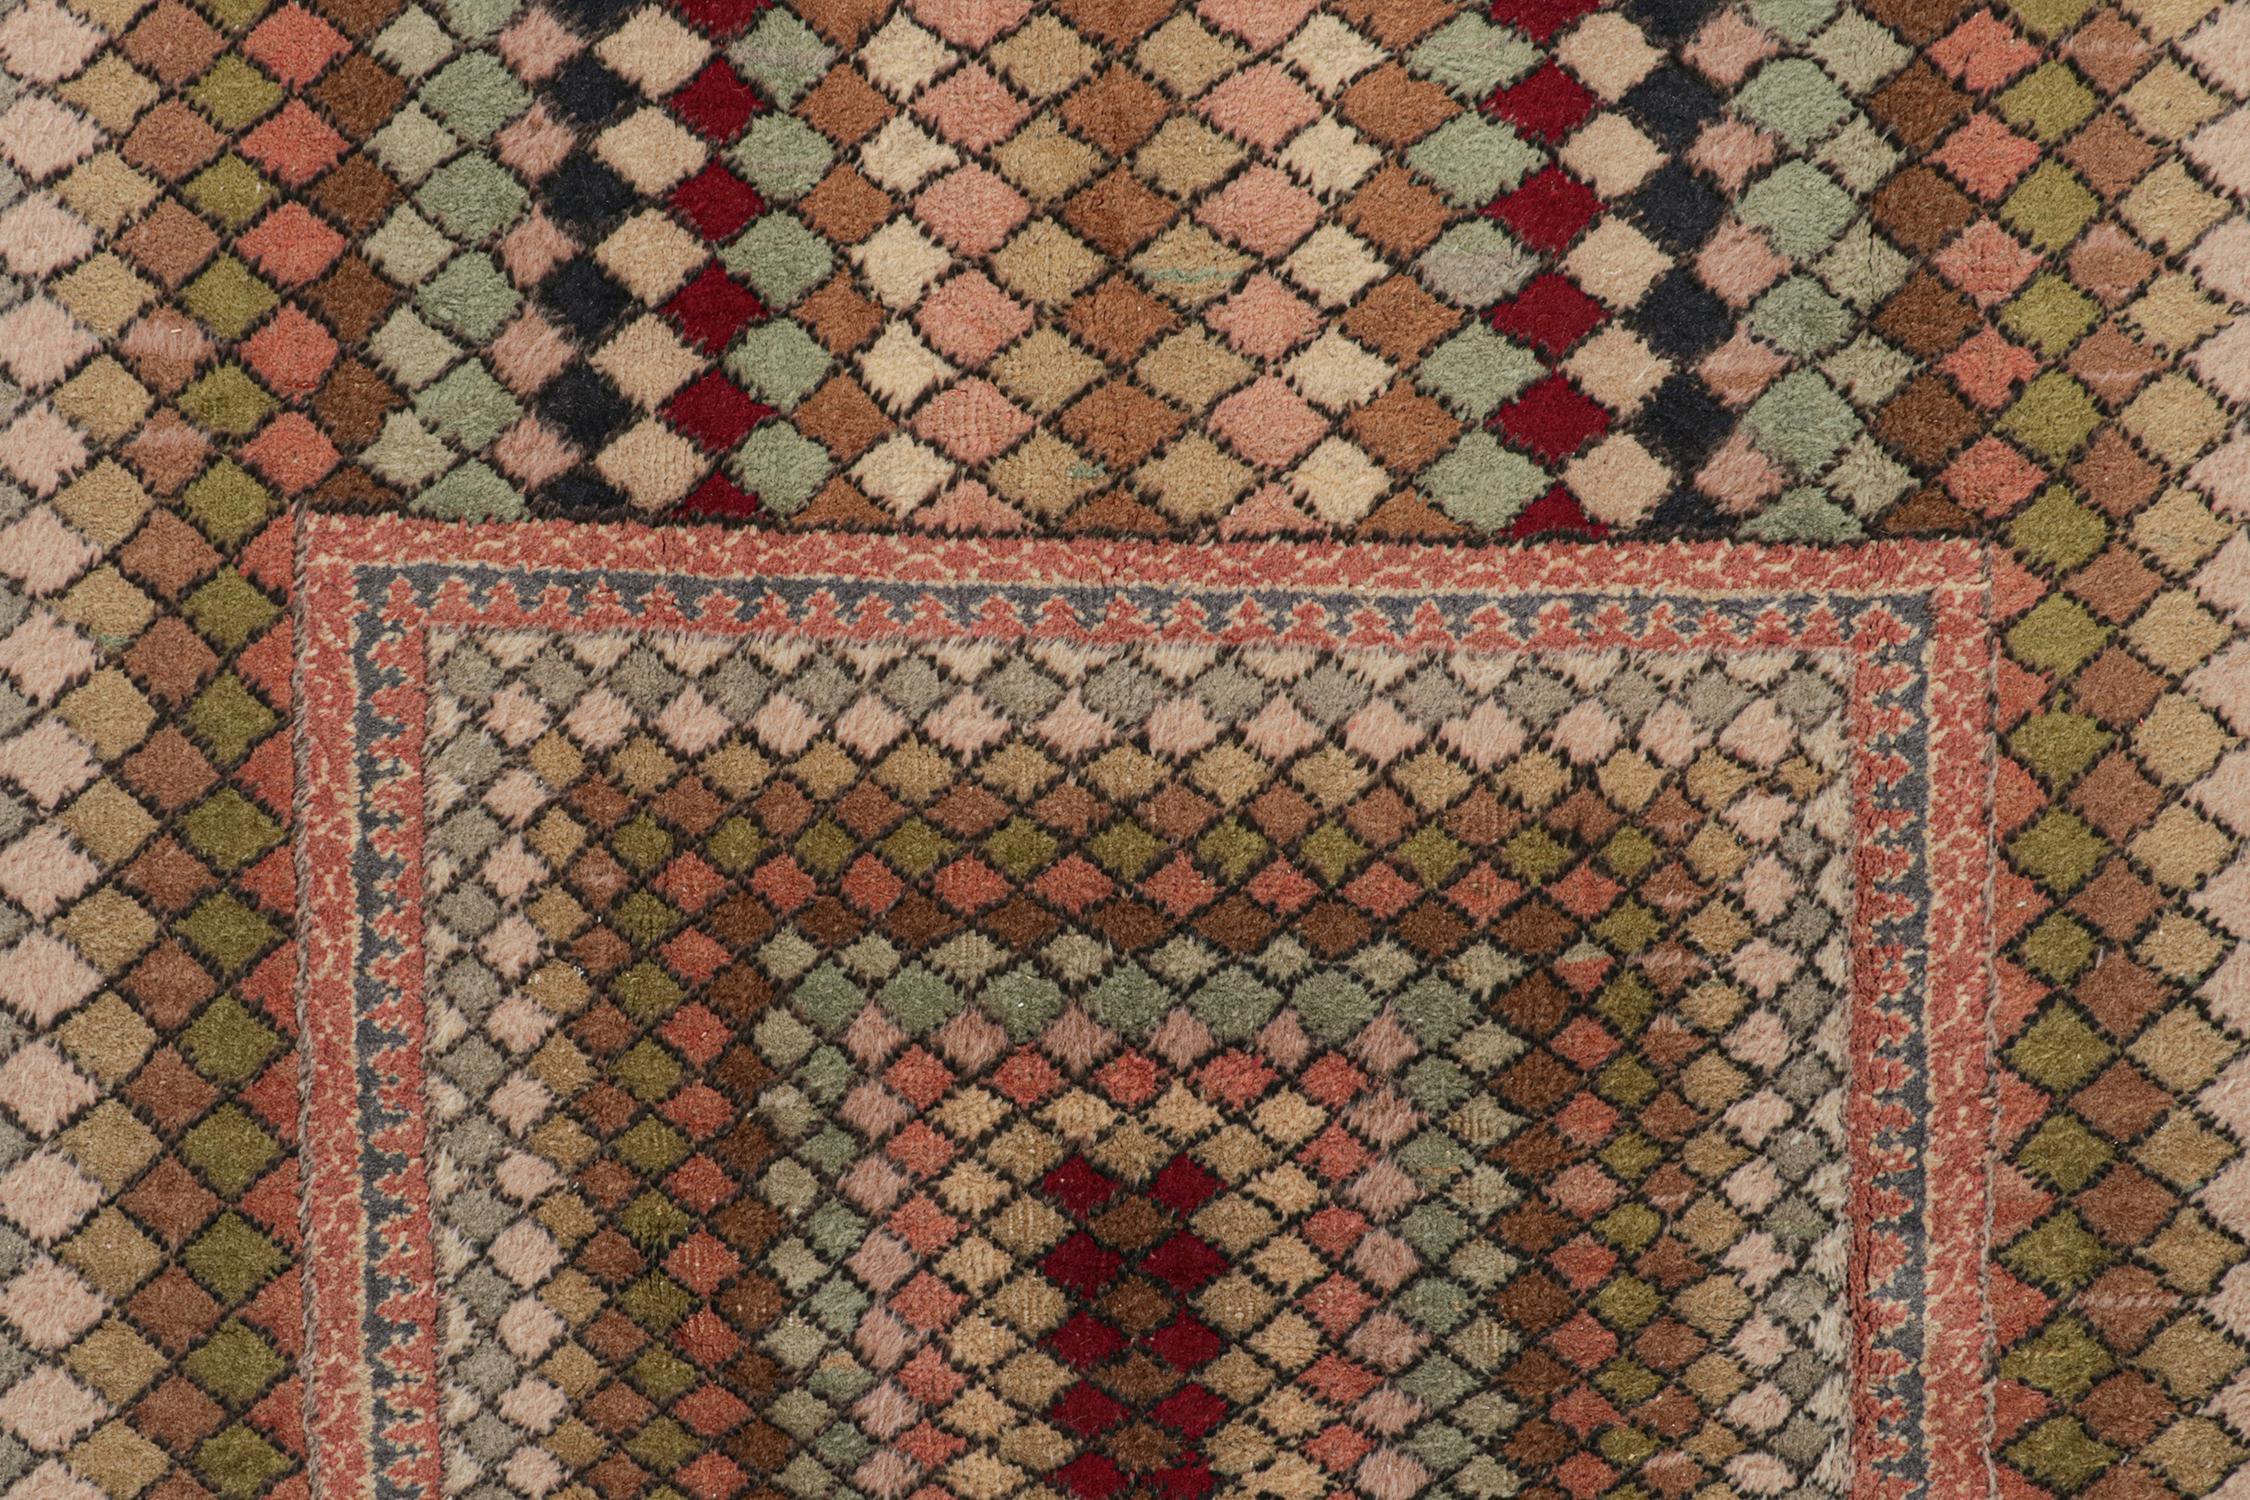 Vintage Zeki Müren Rug in Polychromatic Geometric Patterns by Rug & Kilim In Good Condition For Sale In Long Island City, NY